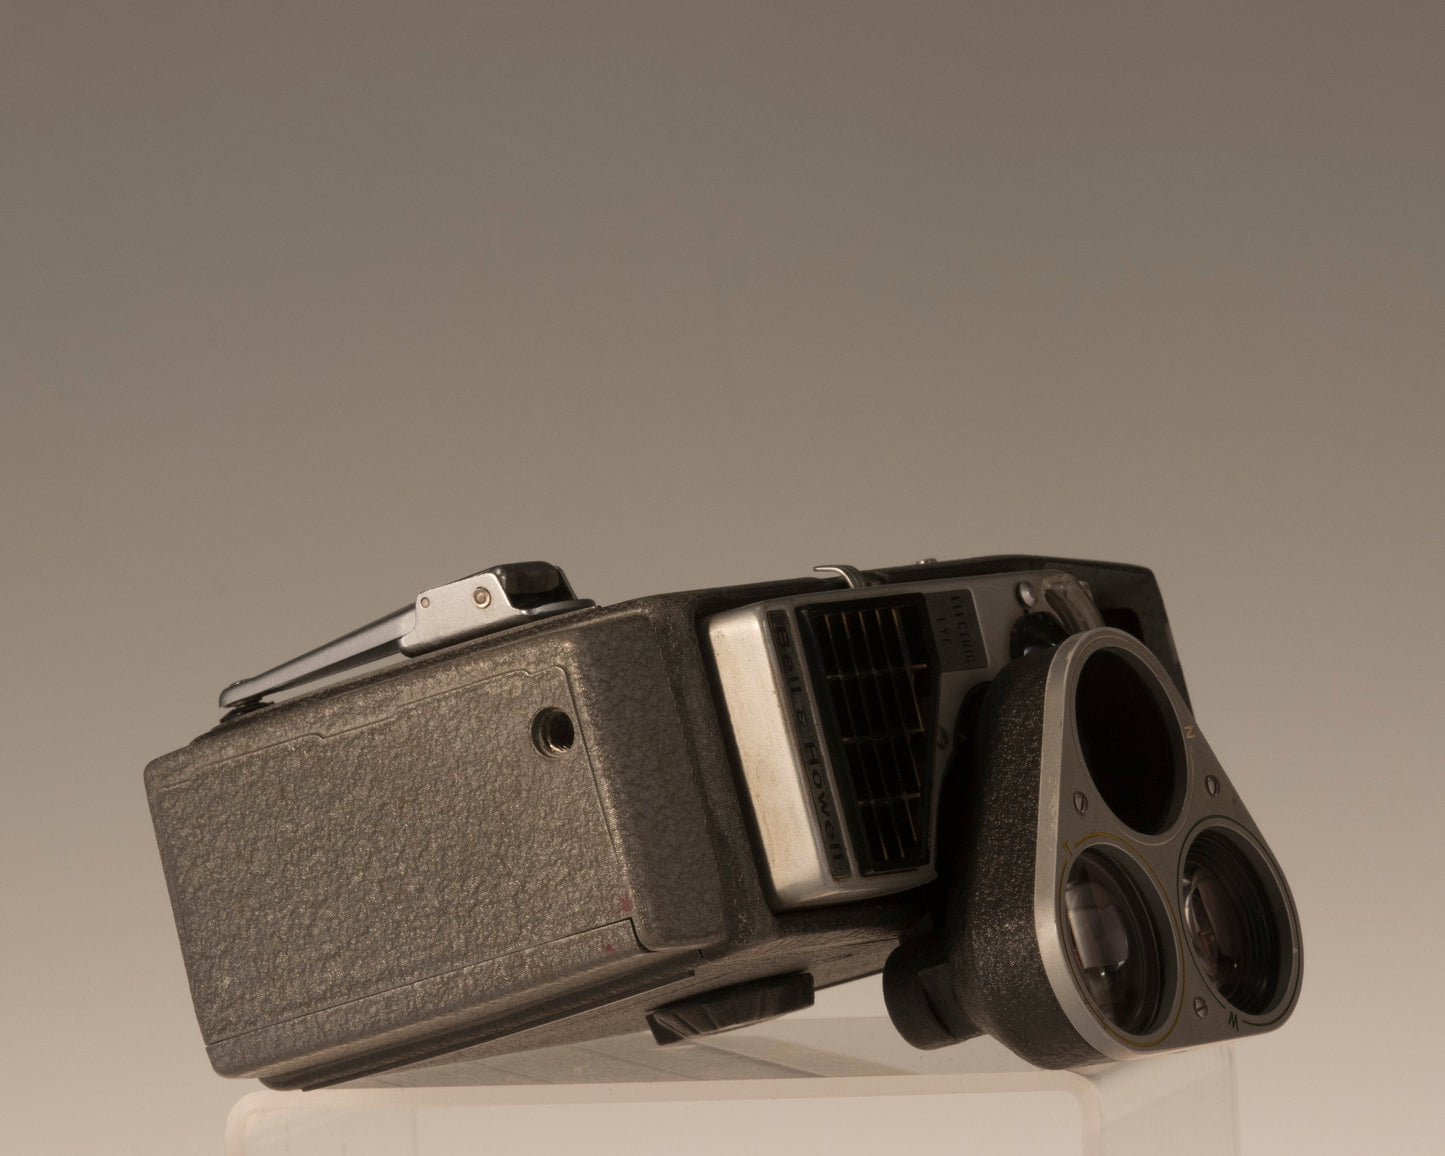 Bell and Howell Electronic Eye 393 8mm movie camera